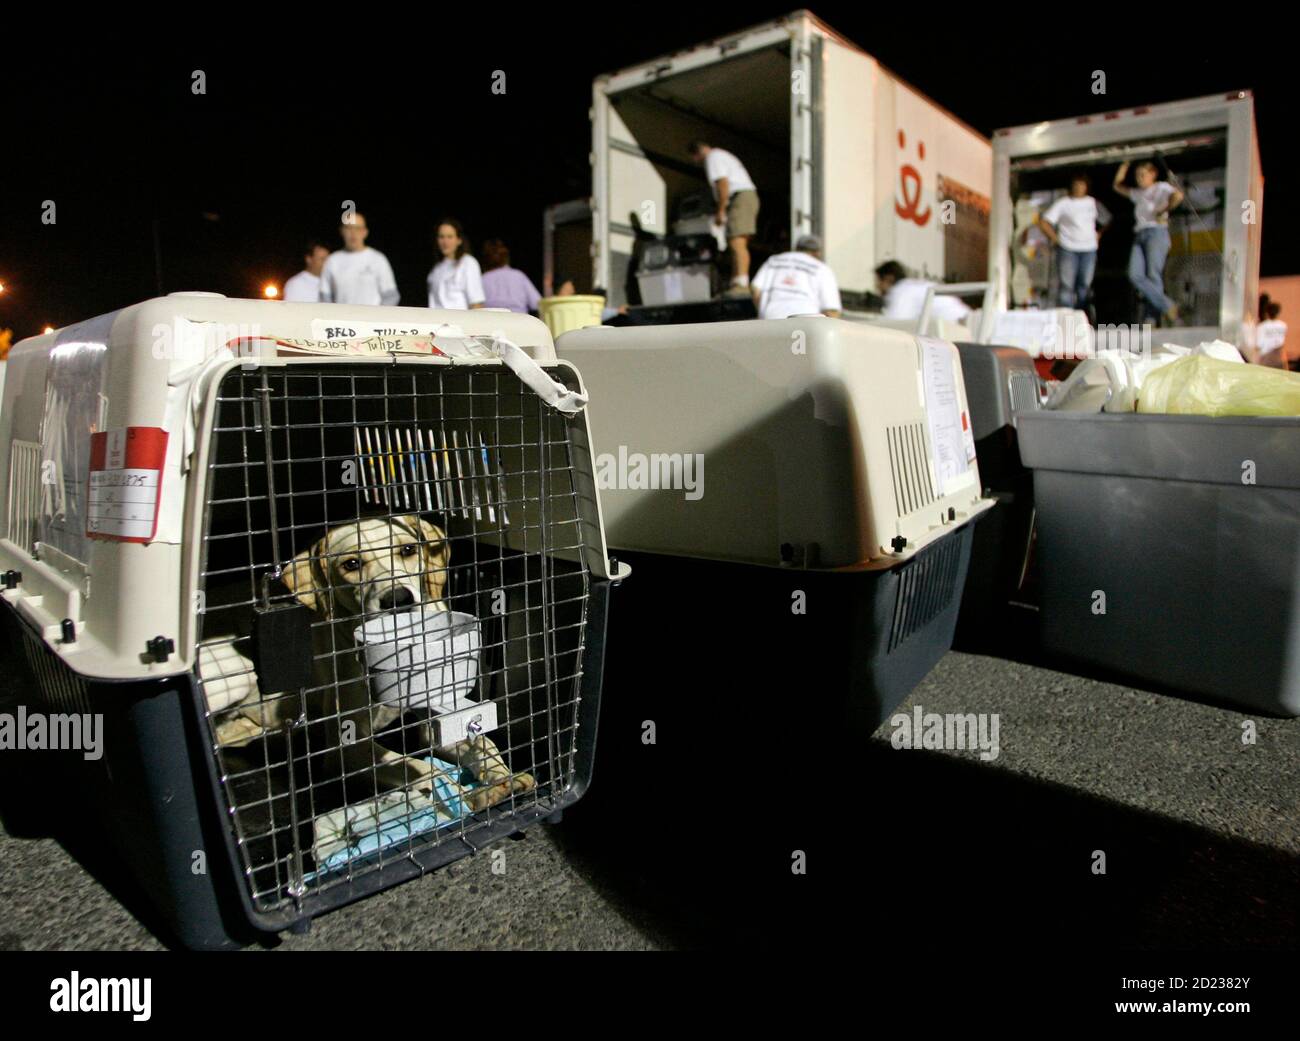 A dog looks out from his crate after arriving from Lebanon by cargo jet at McCarran International Airport in Las Vegas September 26, 2006. About 300 dogs and cats, displaced by the recent war between Israel and Hezbollah militants, are enroute to the Best Friends Animal Sanctuary near Kanab, Utah. The rescue program was organized by the Best Friends Animal Society after Lebanon's only humane society, Beirut for the Ethical Treatment of Animals (BETA), was overwhelmed with displaced pets, organizers said. REUTERS/Steve Marcus (UNITED STATES) Stock Photo